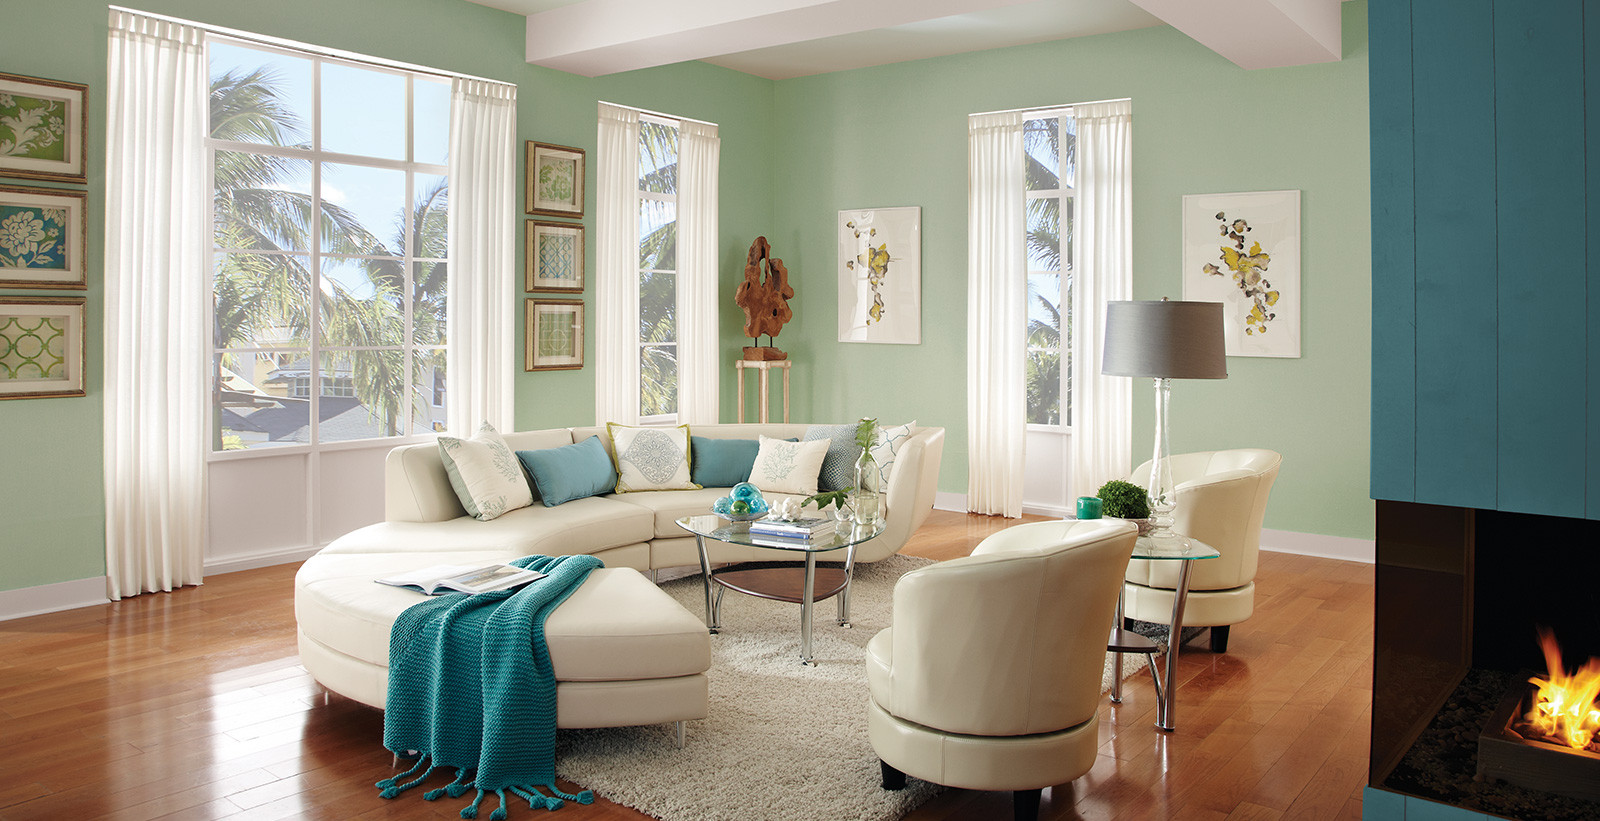 Living Room Color Ideas 2020
 Calming Living Room Ideas and Inspirational Paint Colors